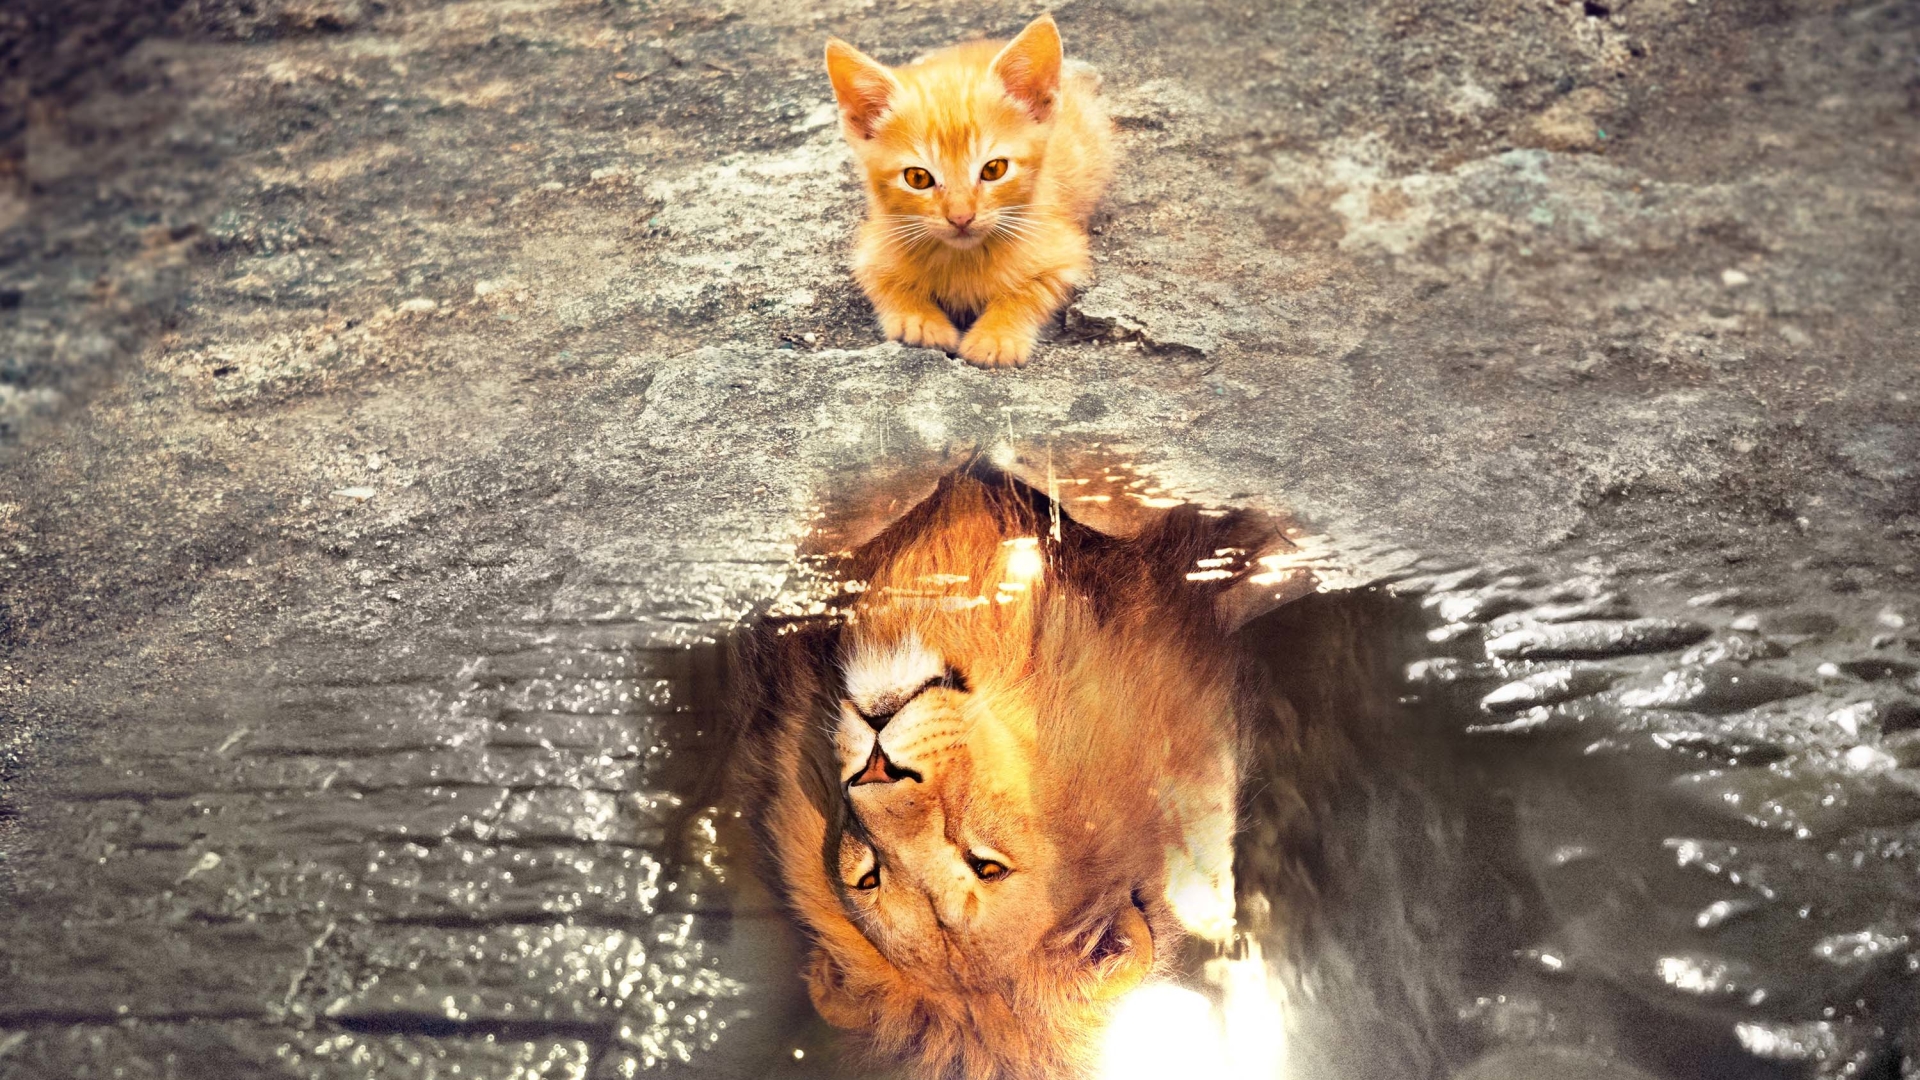 Nature Animals Cats Kittens Lion Wild Cat Water Reflection Imagination Baby Animals Courageous Cobbl Wallpaper:1920x1080